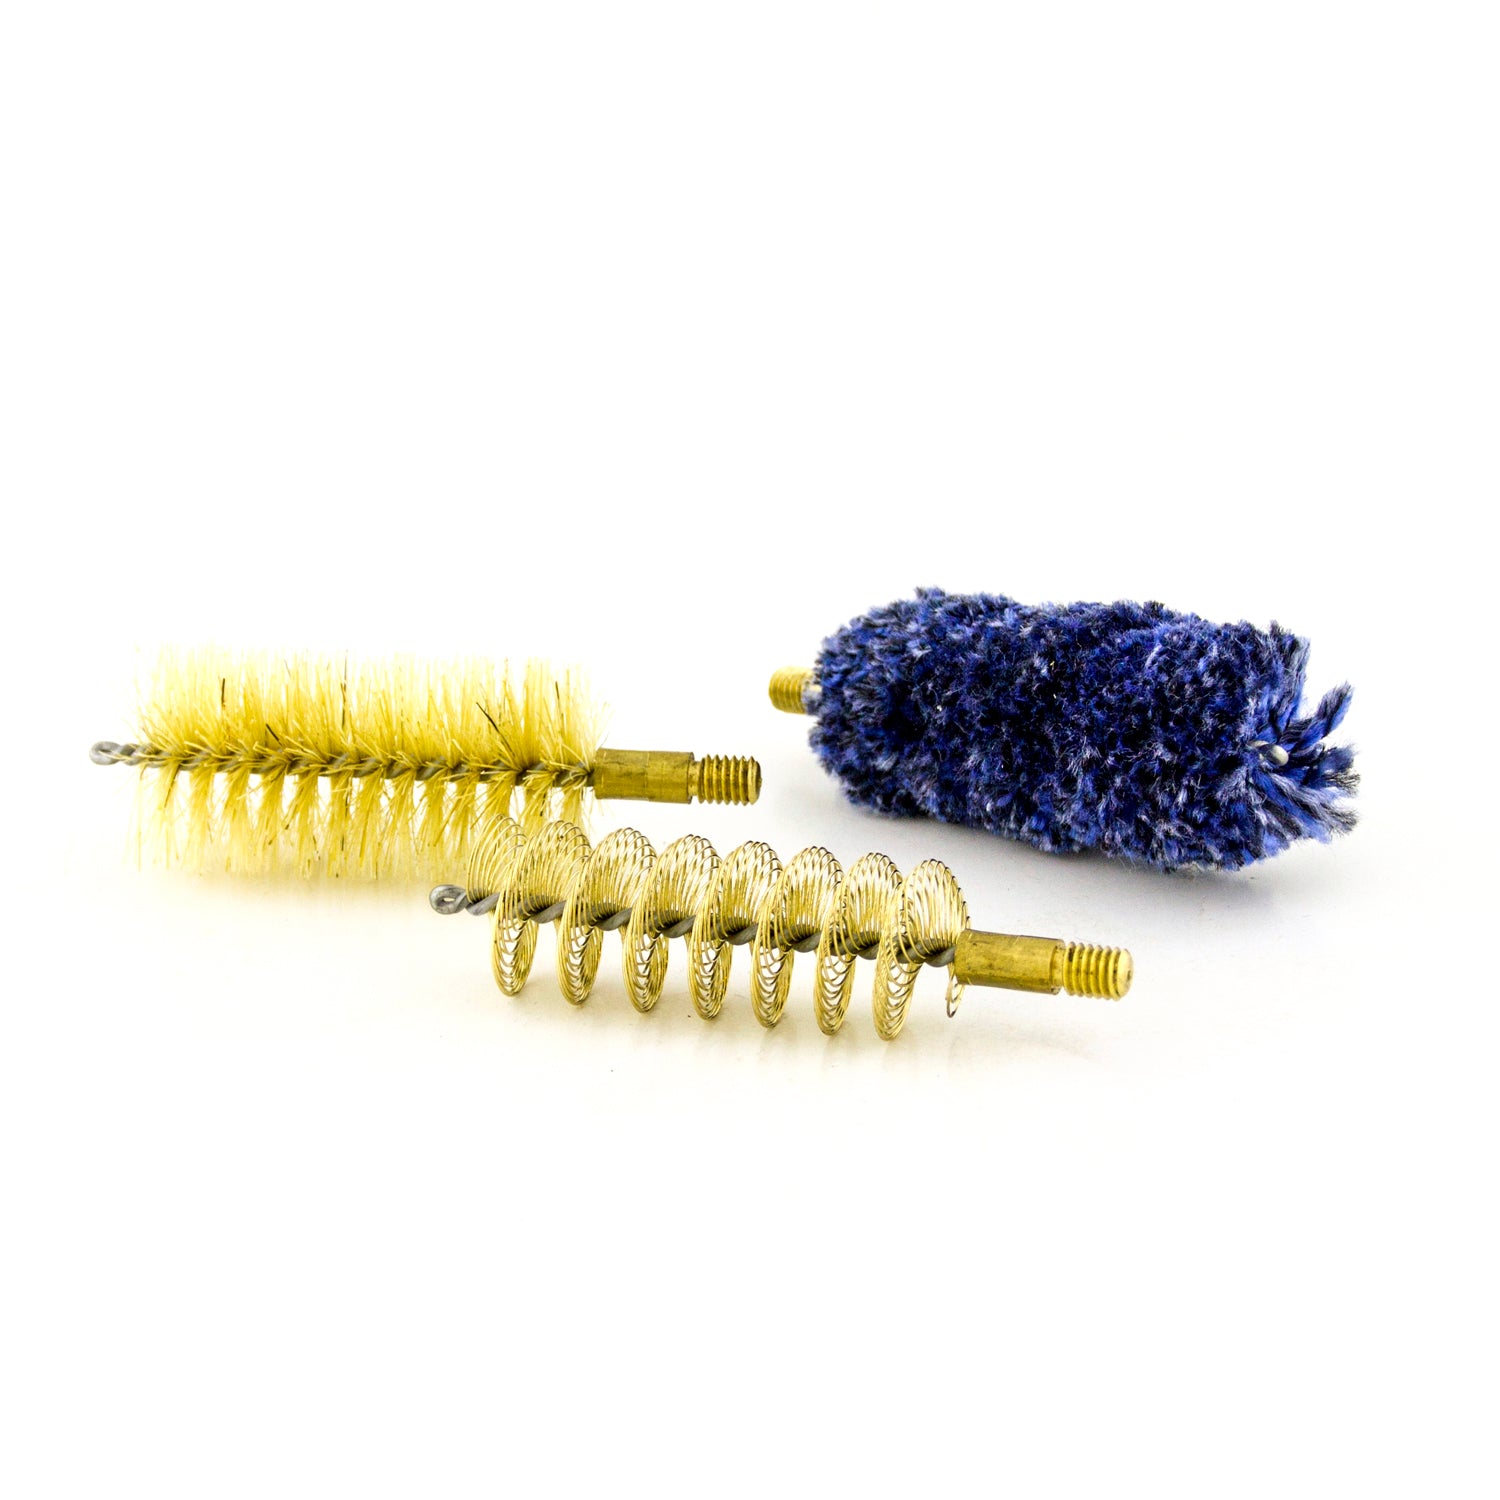 3 Spare Brush Set For Rifle: Helical-Wool-Brass for 12GA